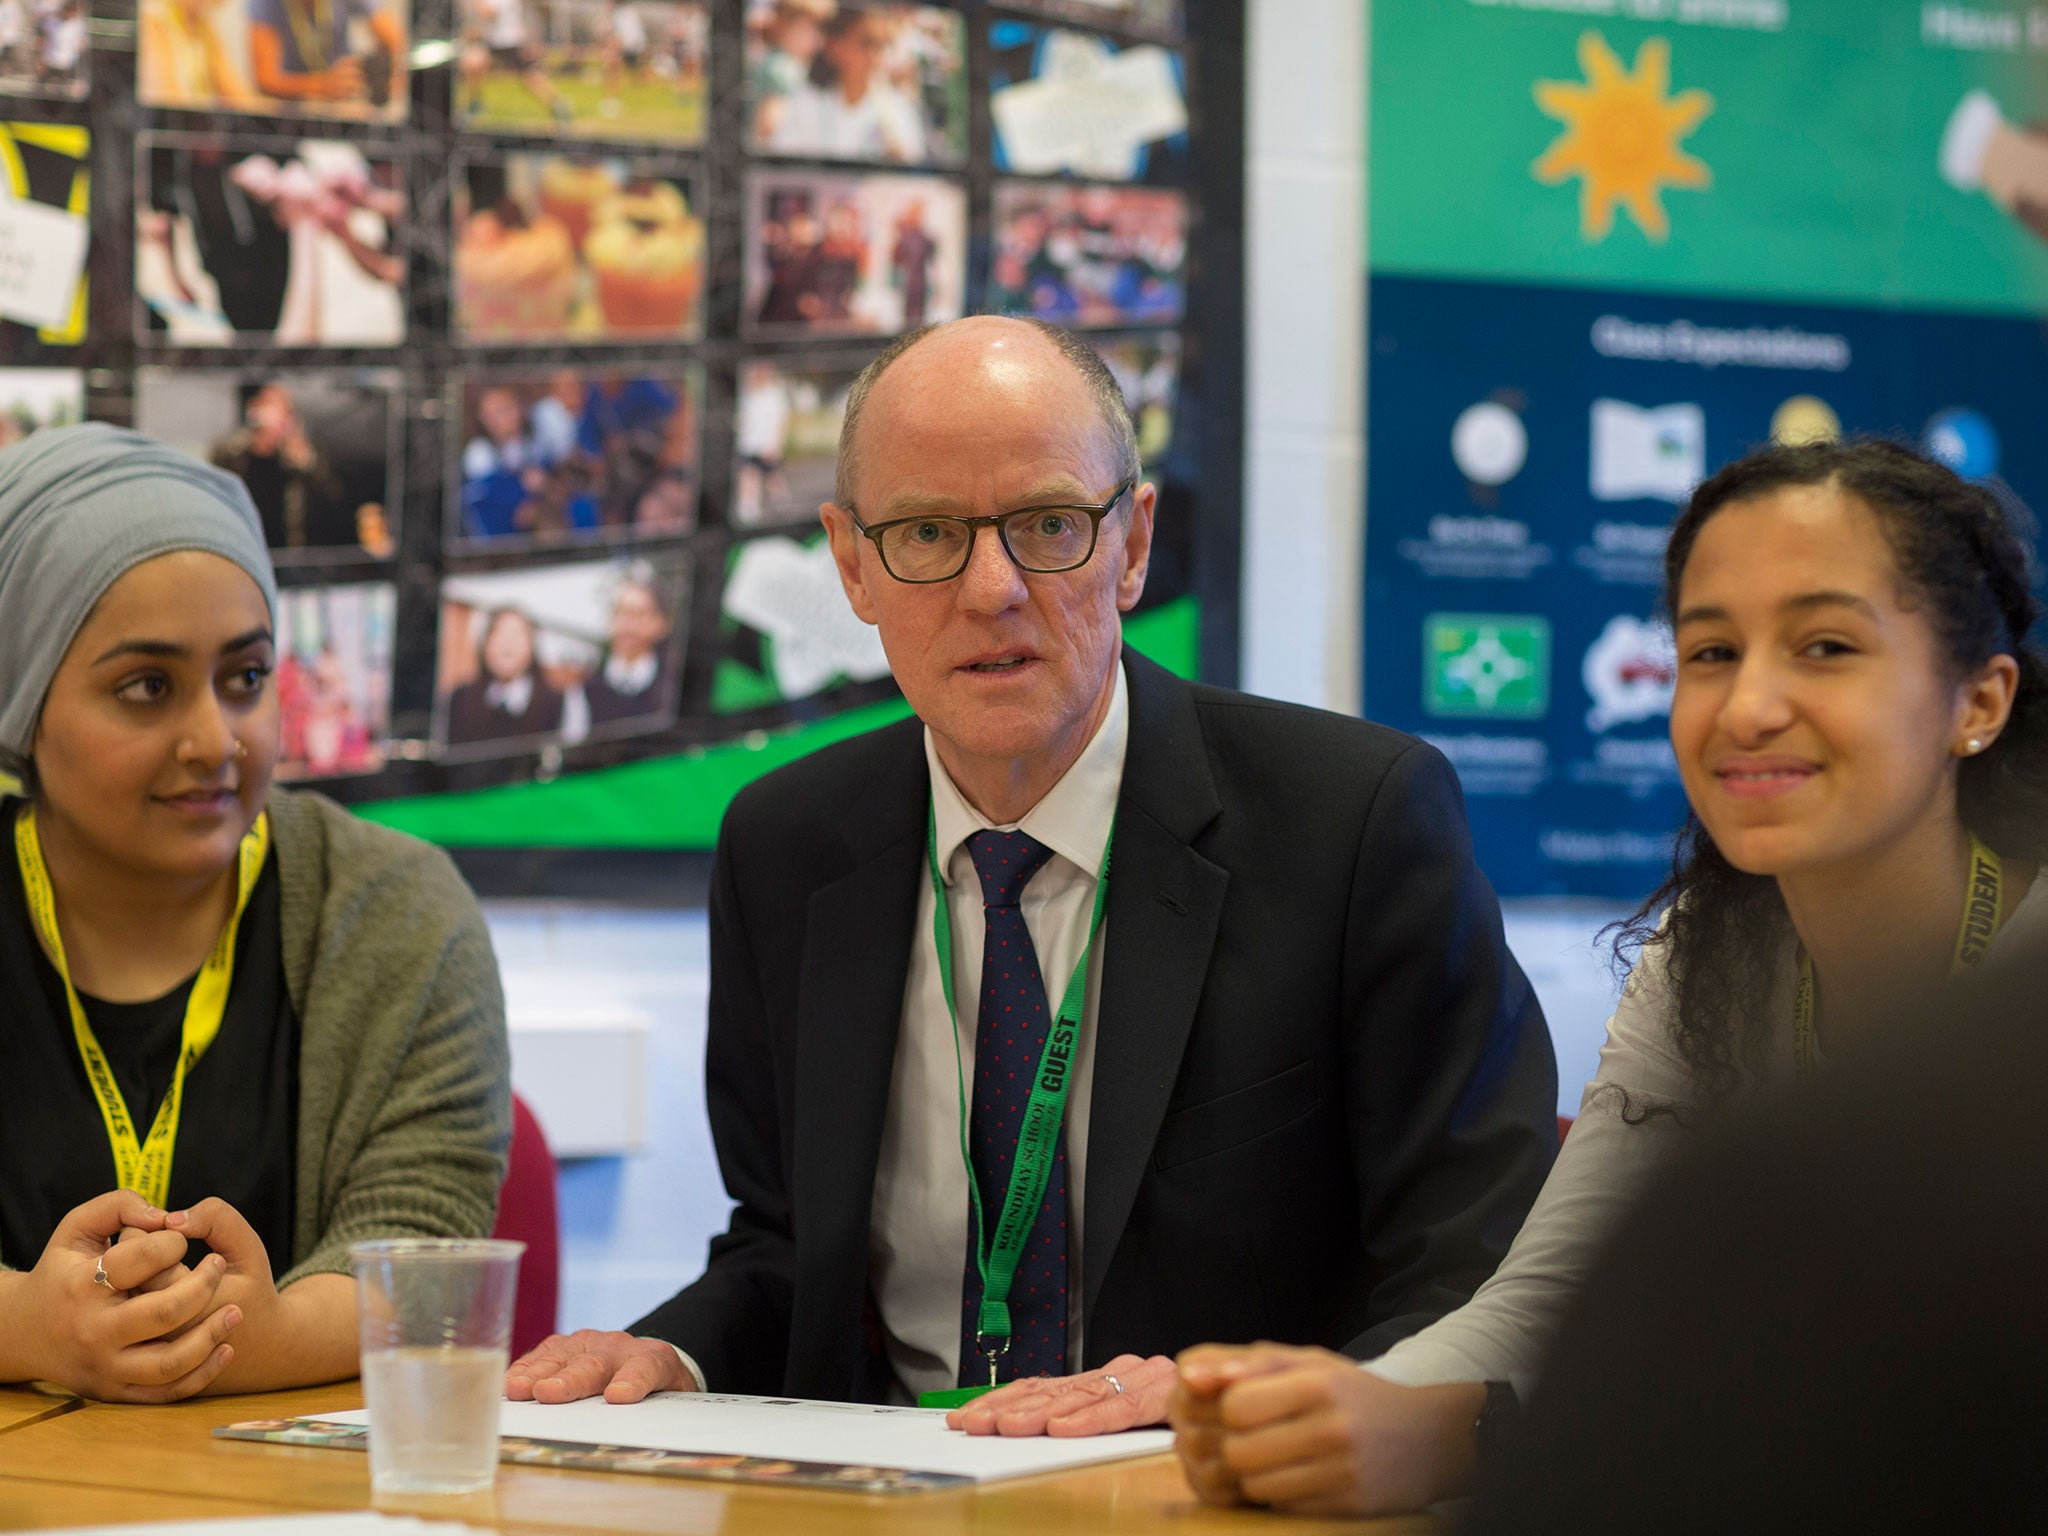 Nick Gibb has said taking exams earlier on could help pupils cope with stress